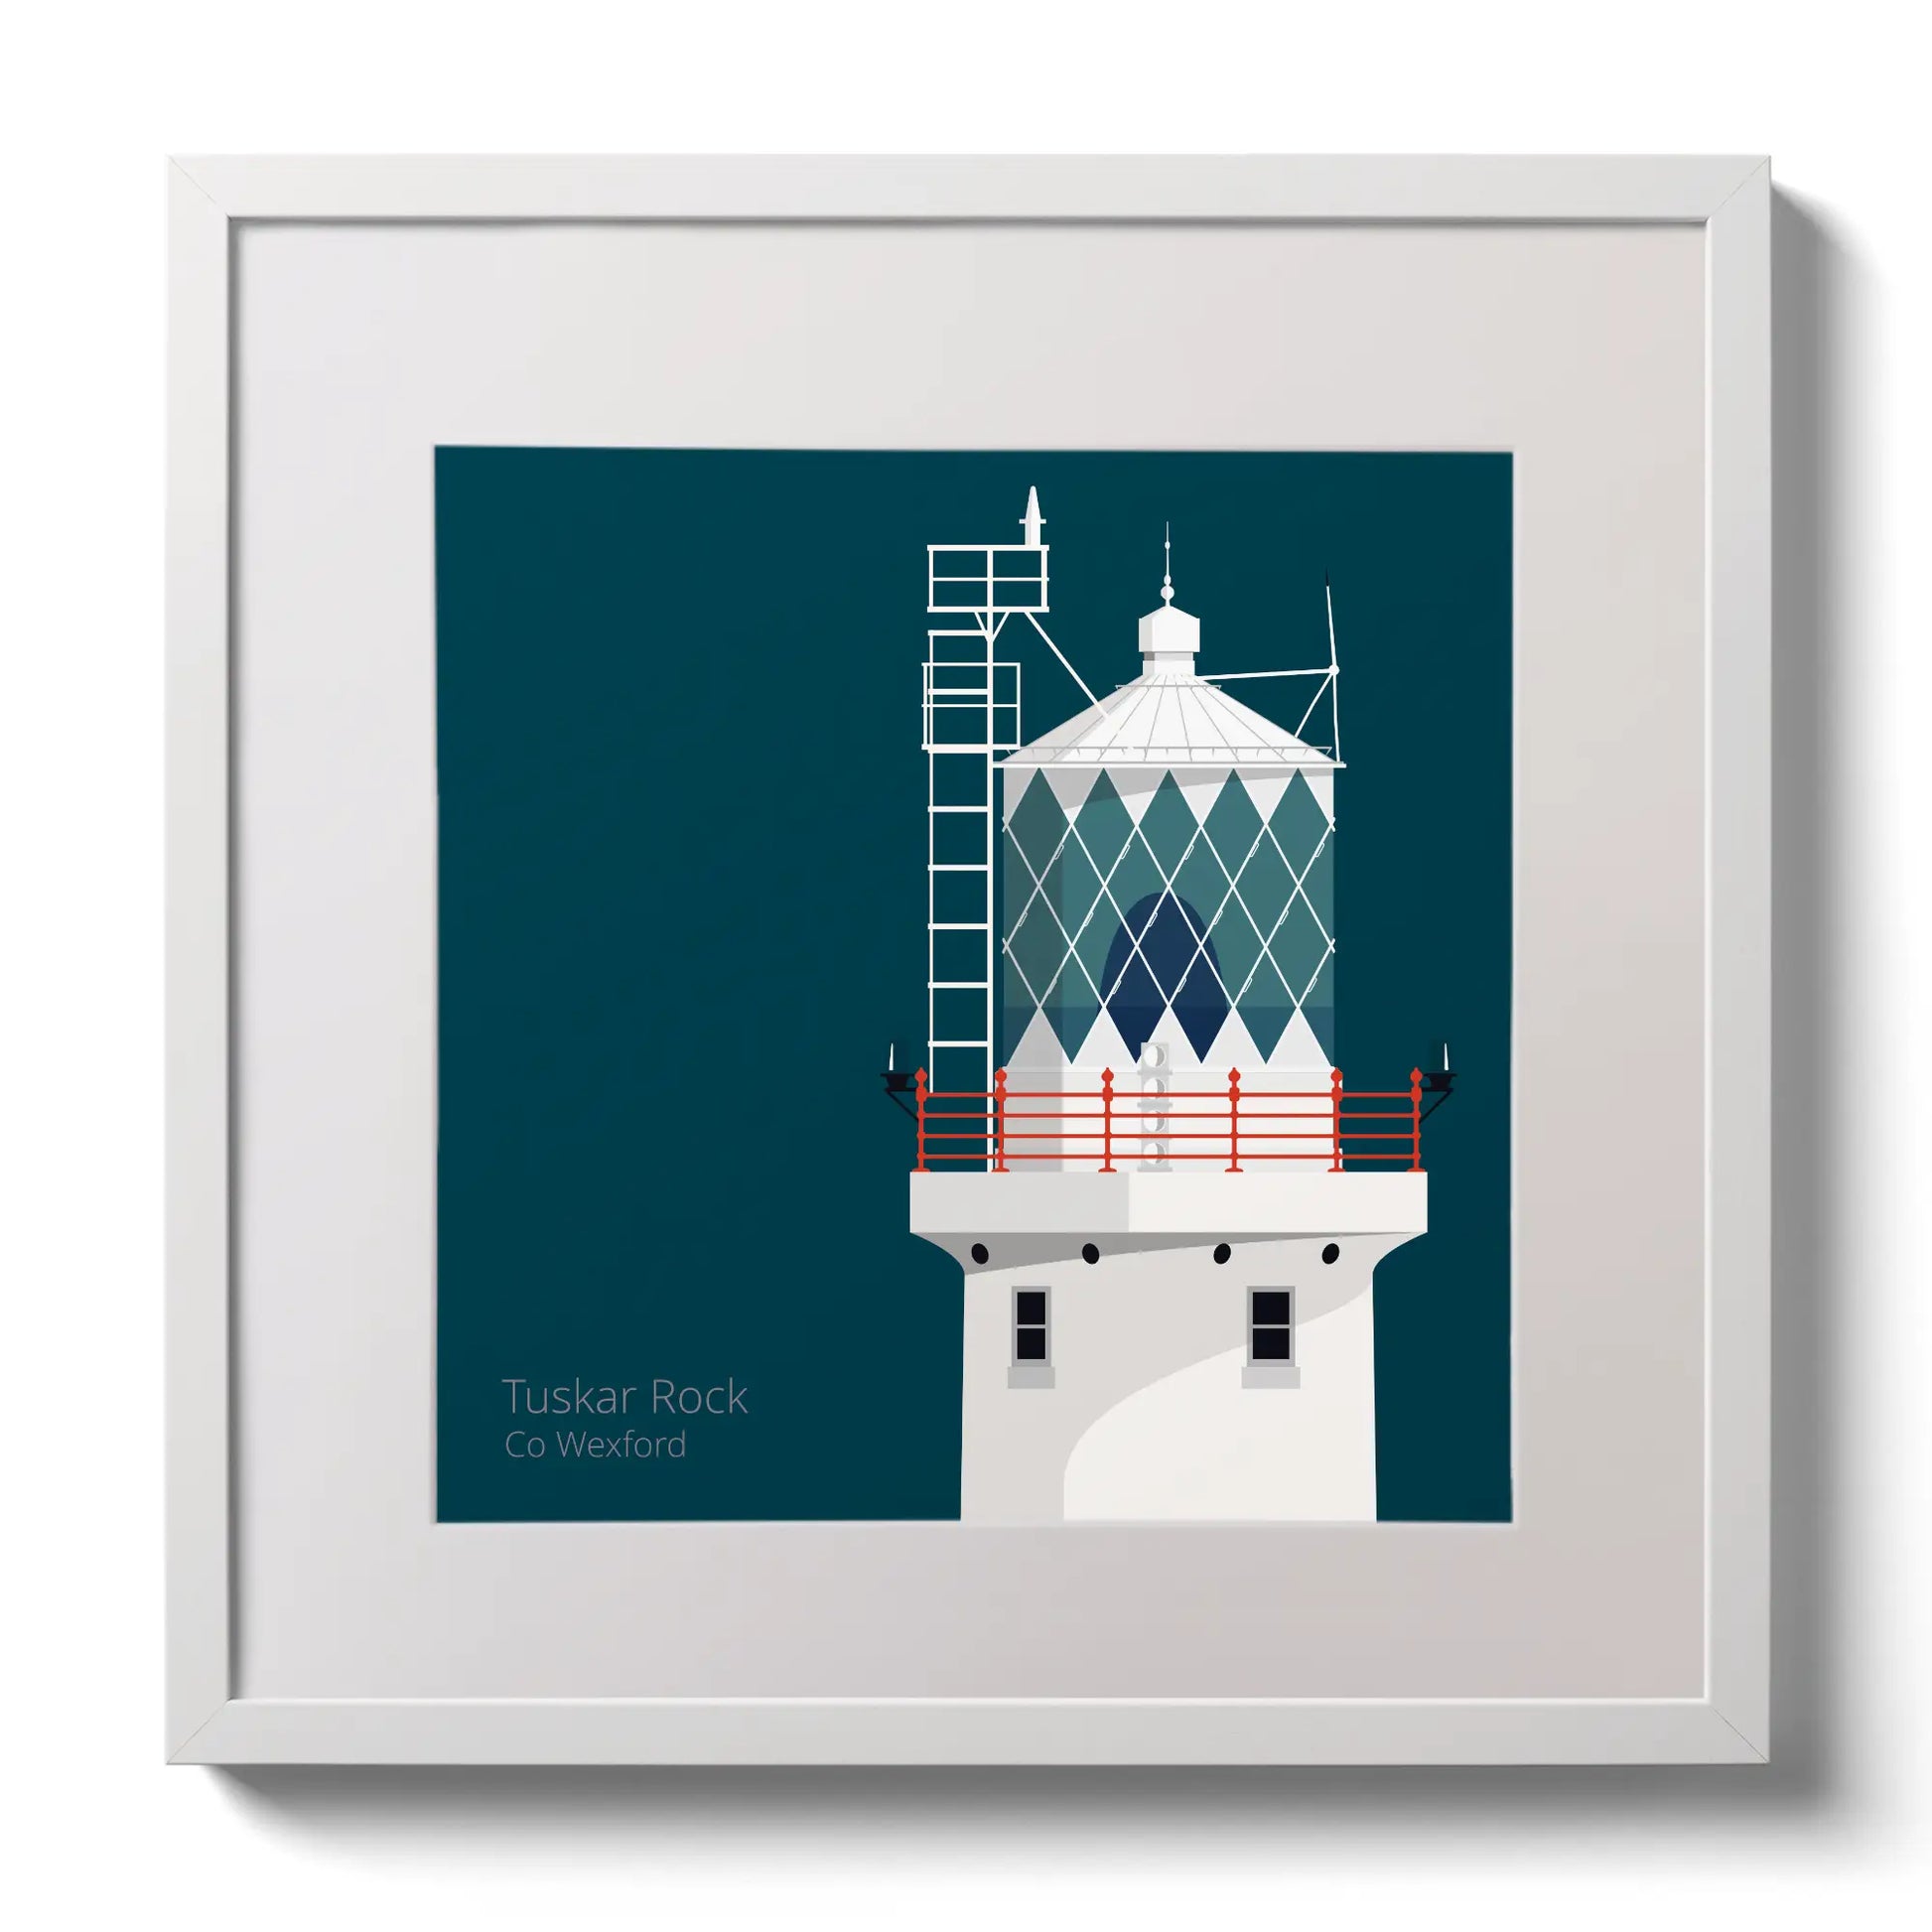 Illustration of Tuskar Rock lighthouse on a midnight blue background,  in a white square frame measuring 30x30cm.